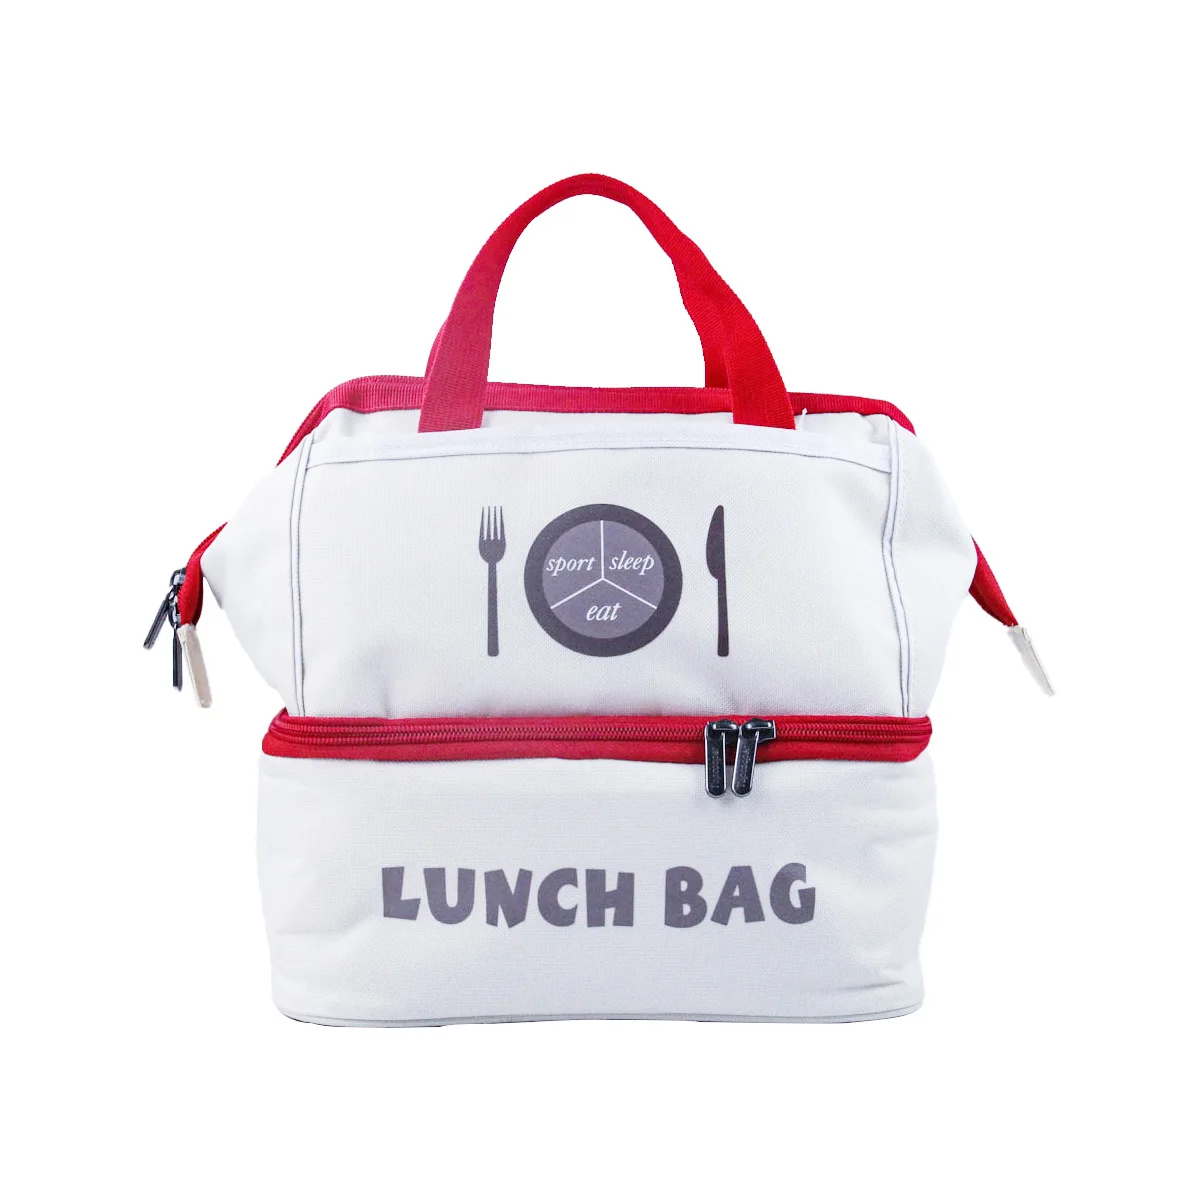 Multi-compartment Lunch Bag For Food School,Daily Use - Buy Multi ...